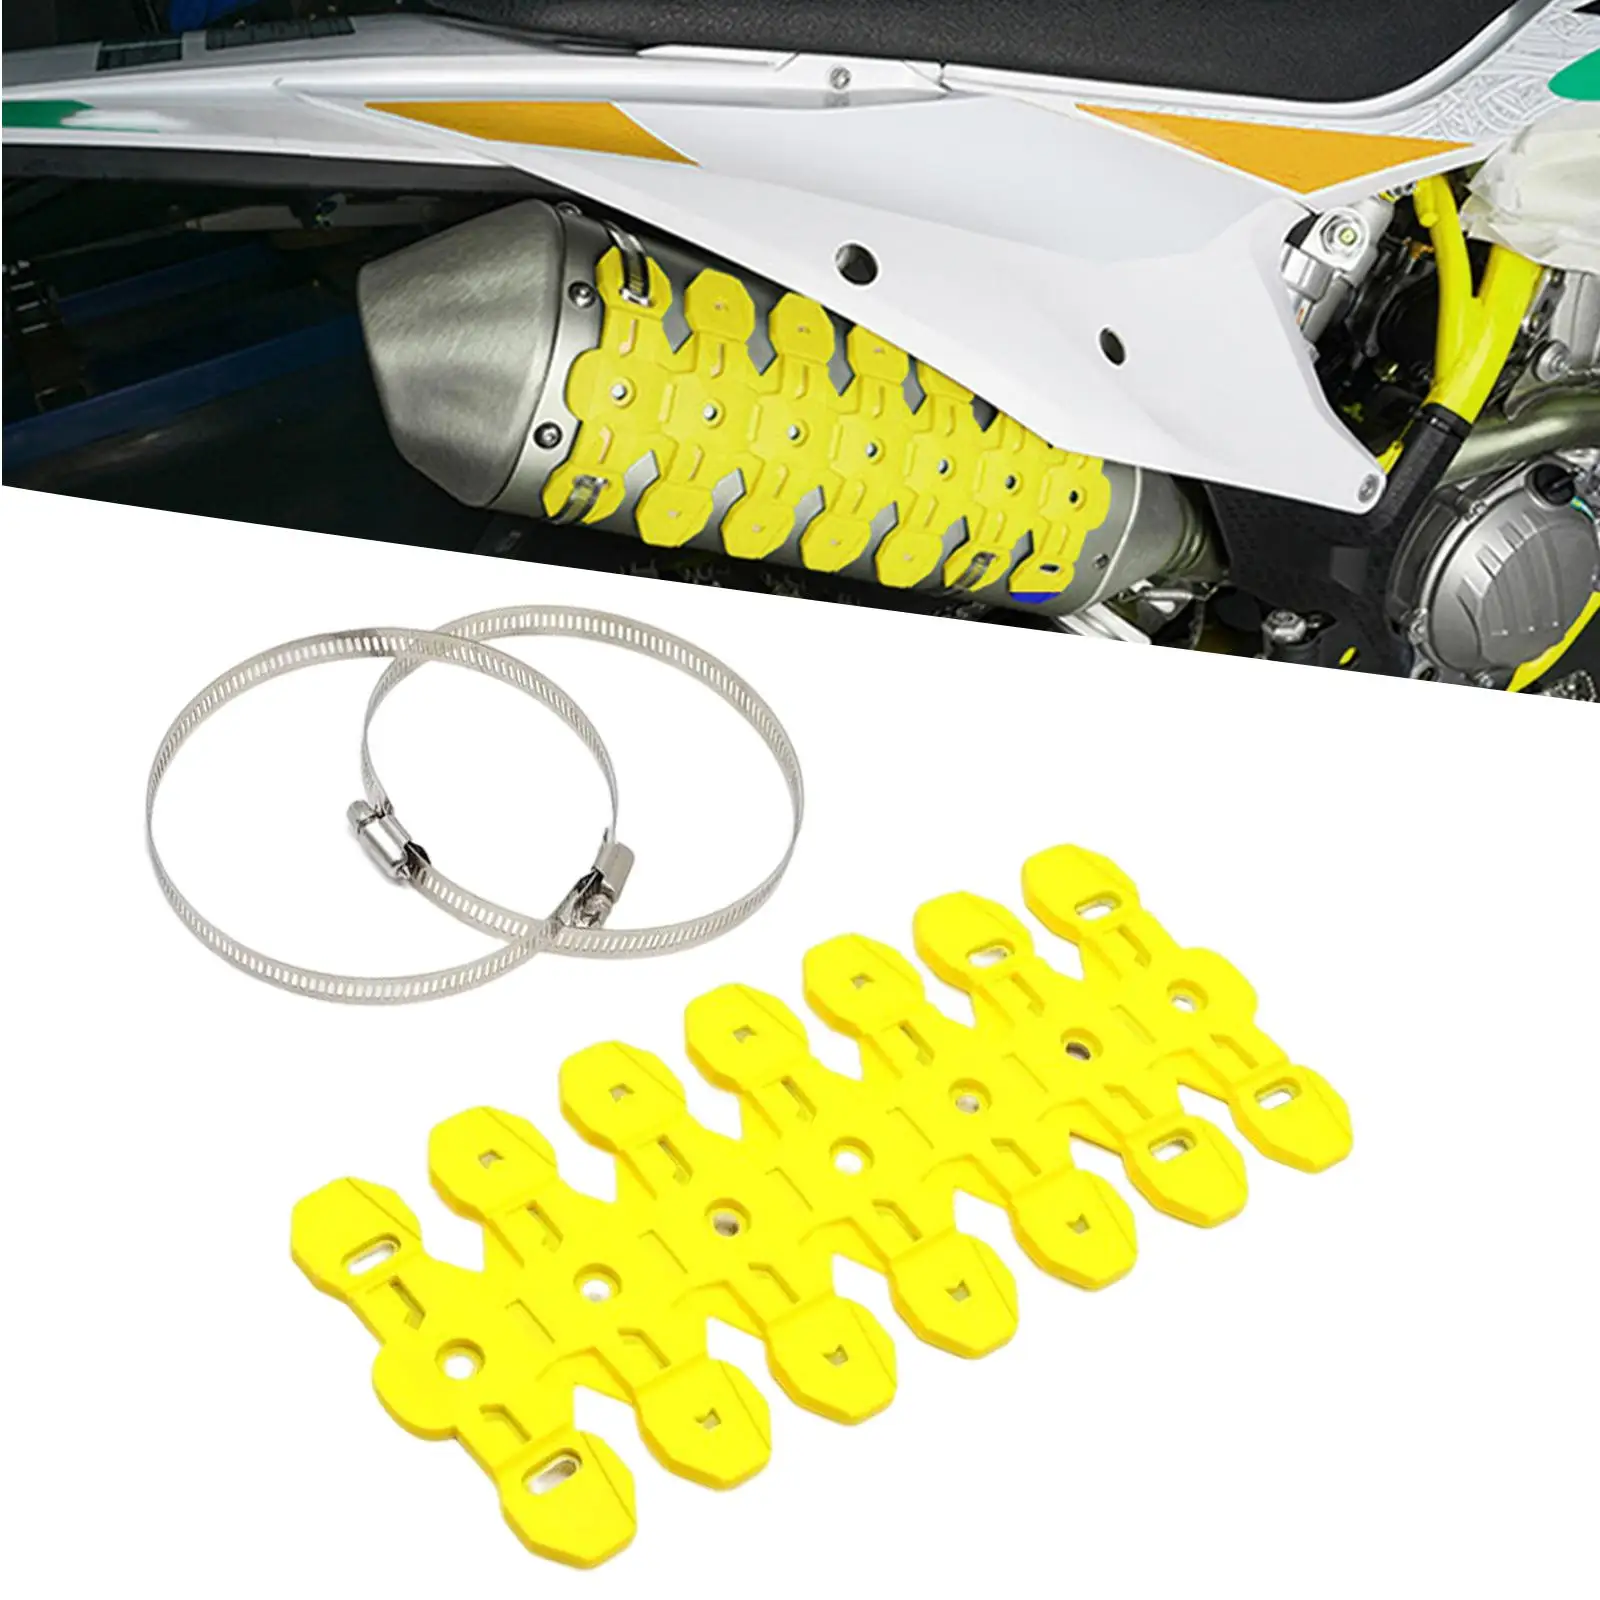 Motorcycle Exhaust Pipe Protector Heat Cover for Motorbike High Performance